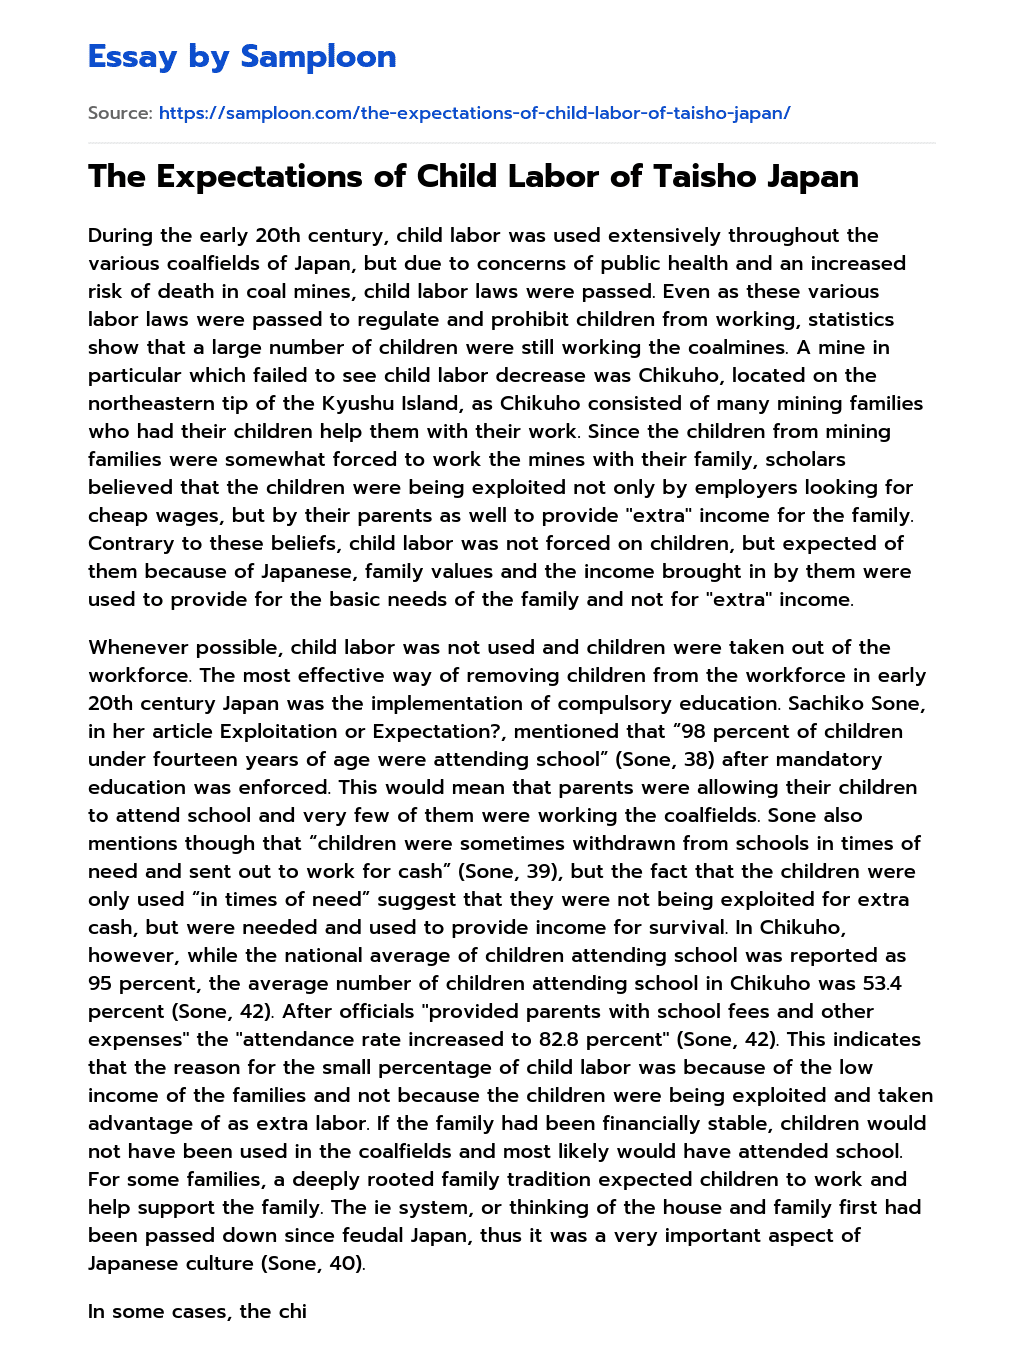 The Expectations of Child Labor of Taisho Japan essay